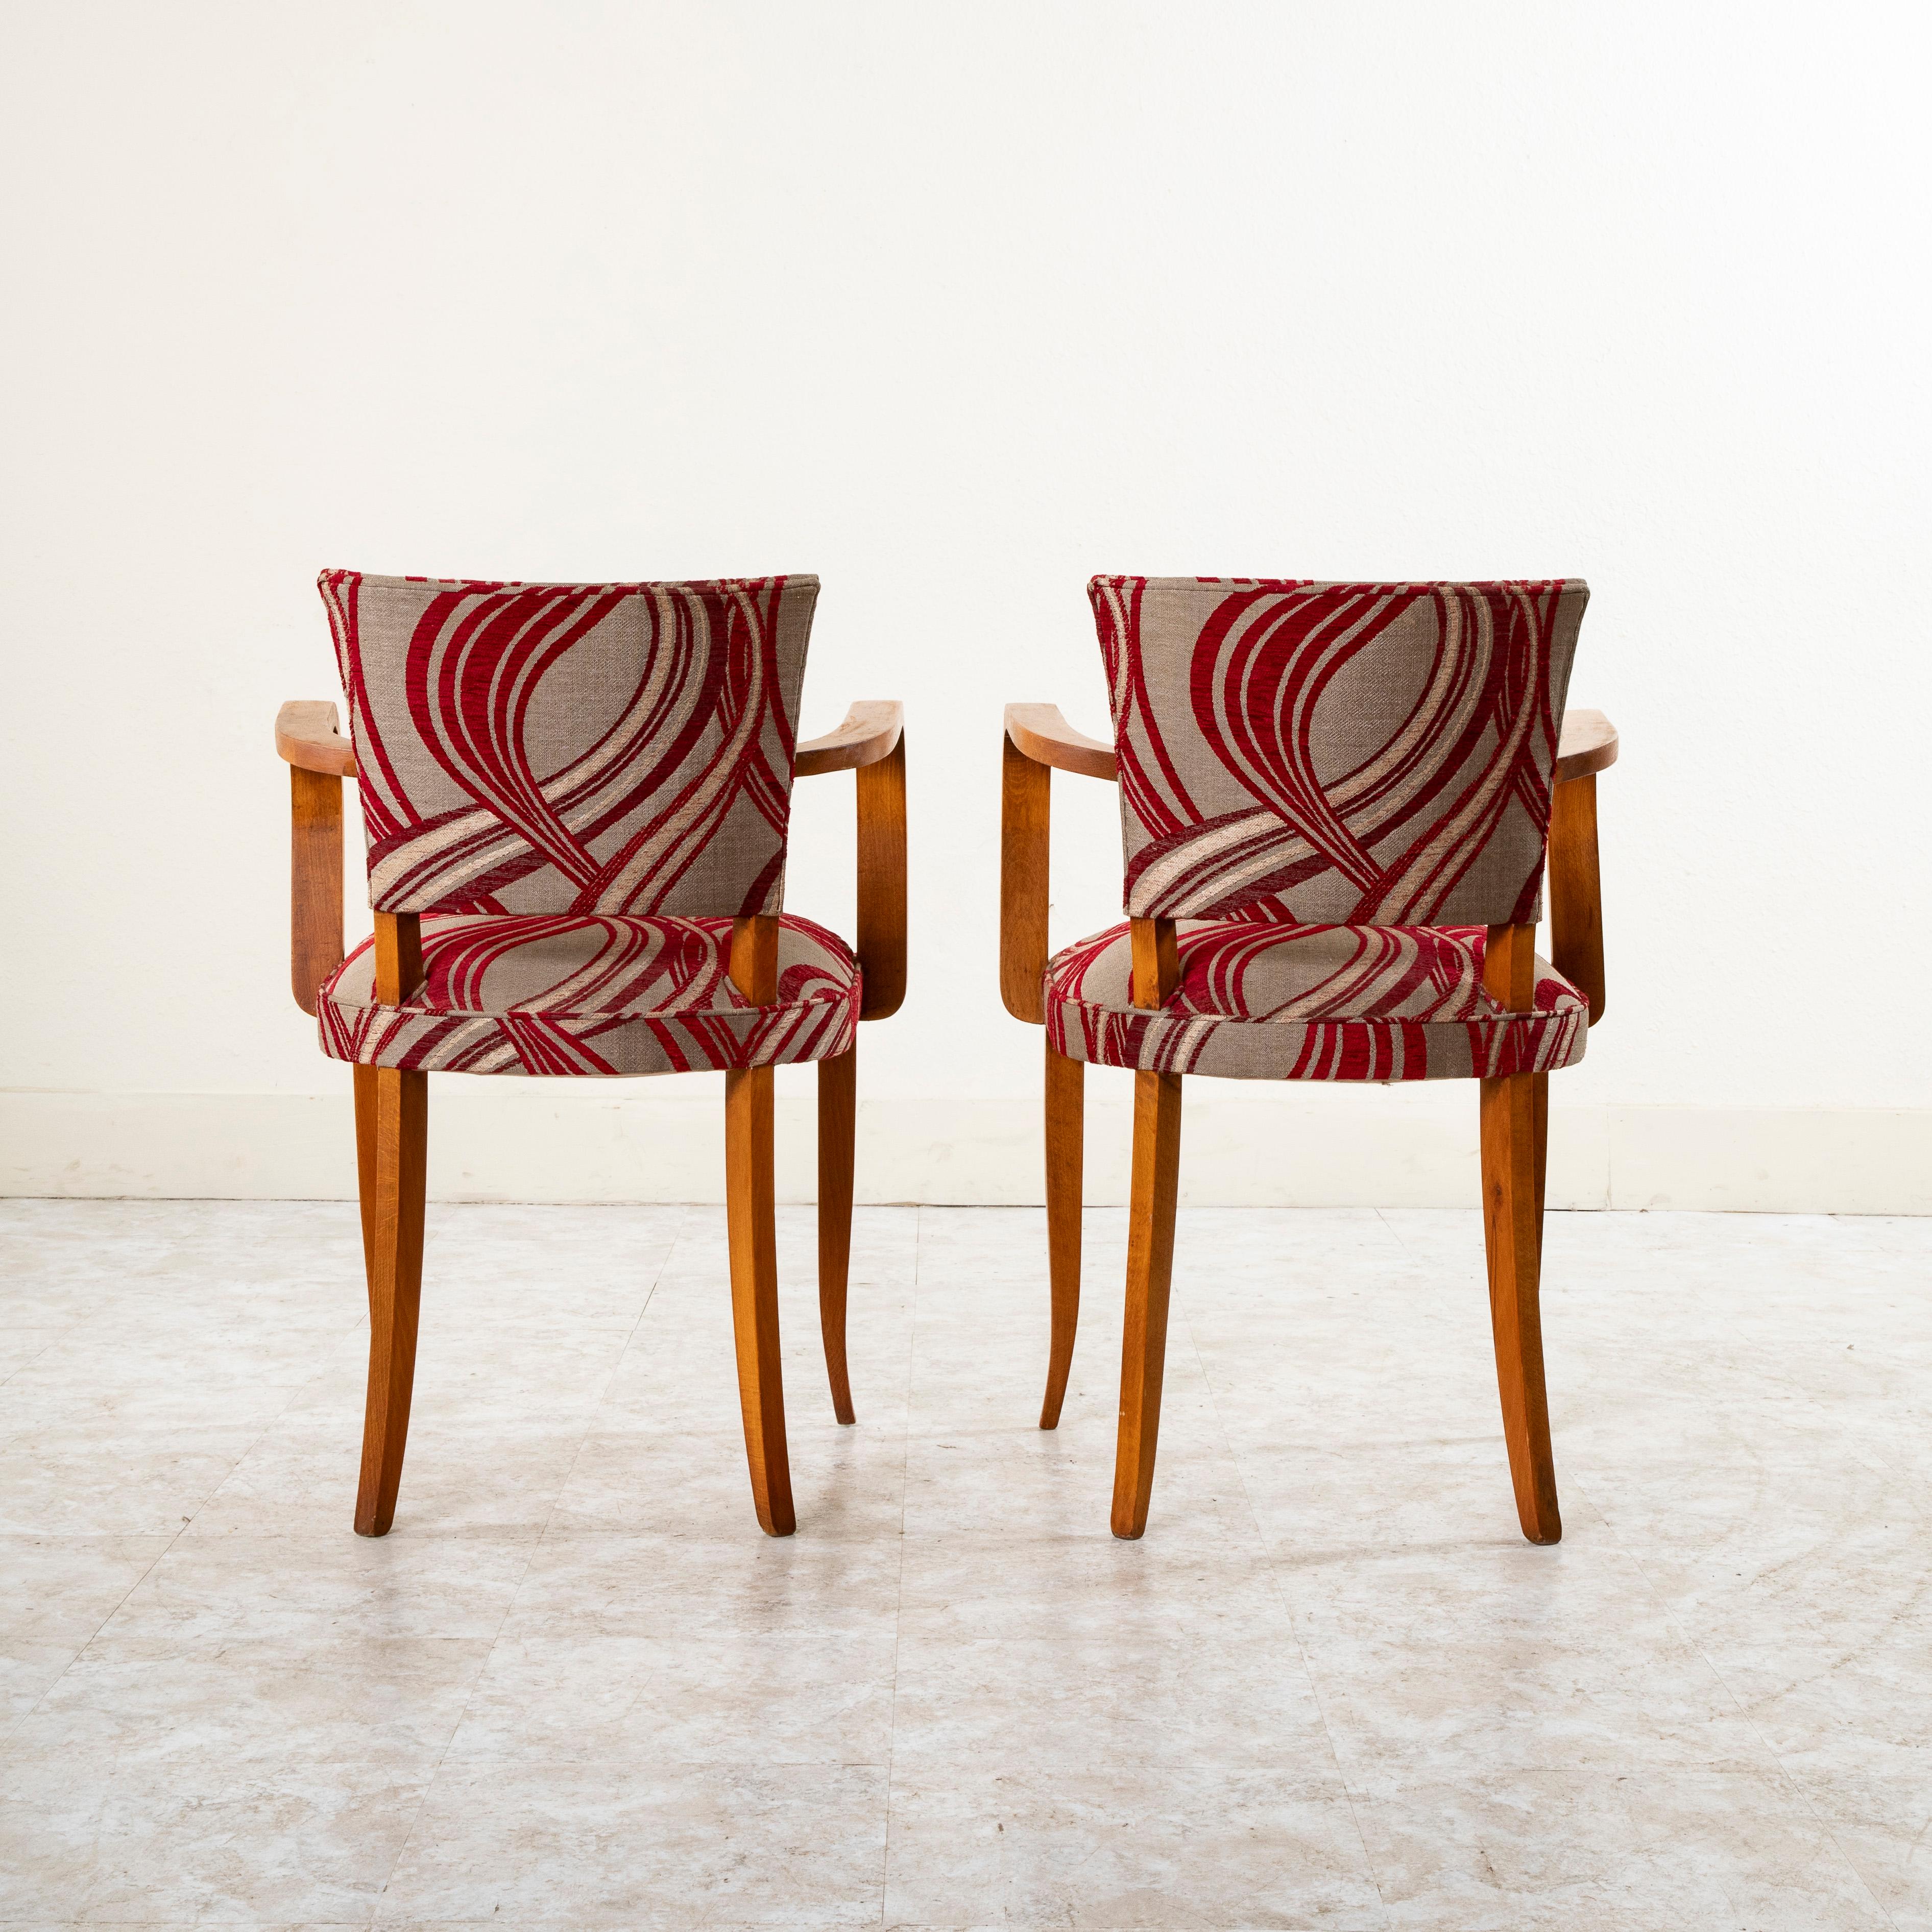 Mid-20th Century French Walnut Bridge Chairs in Red and Gray Upholstery For Sale 13